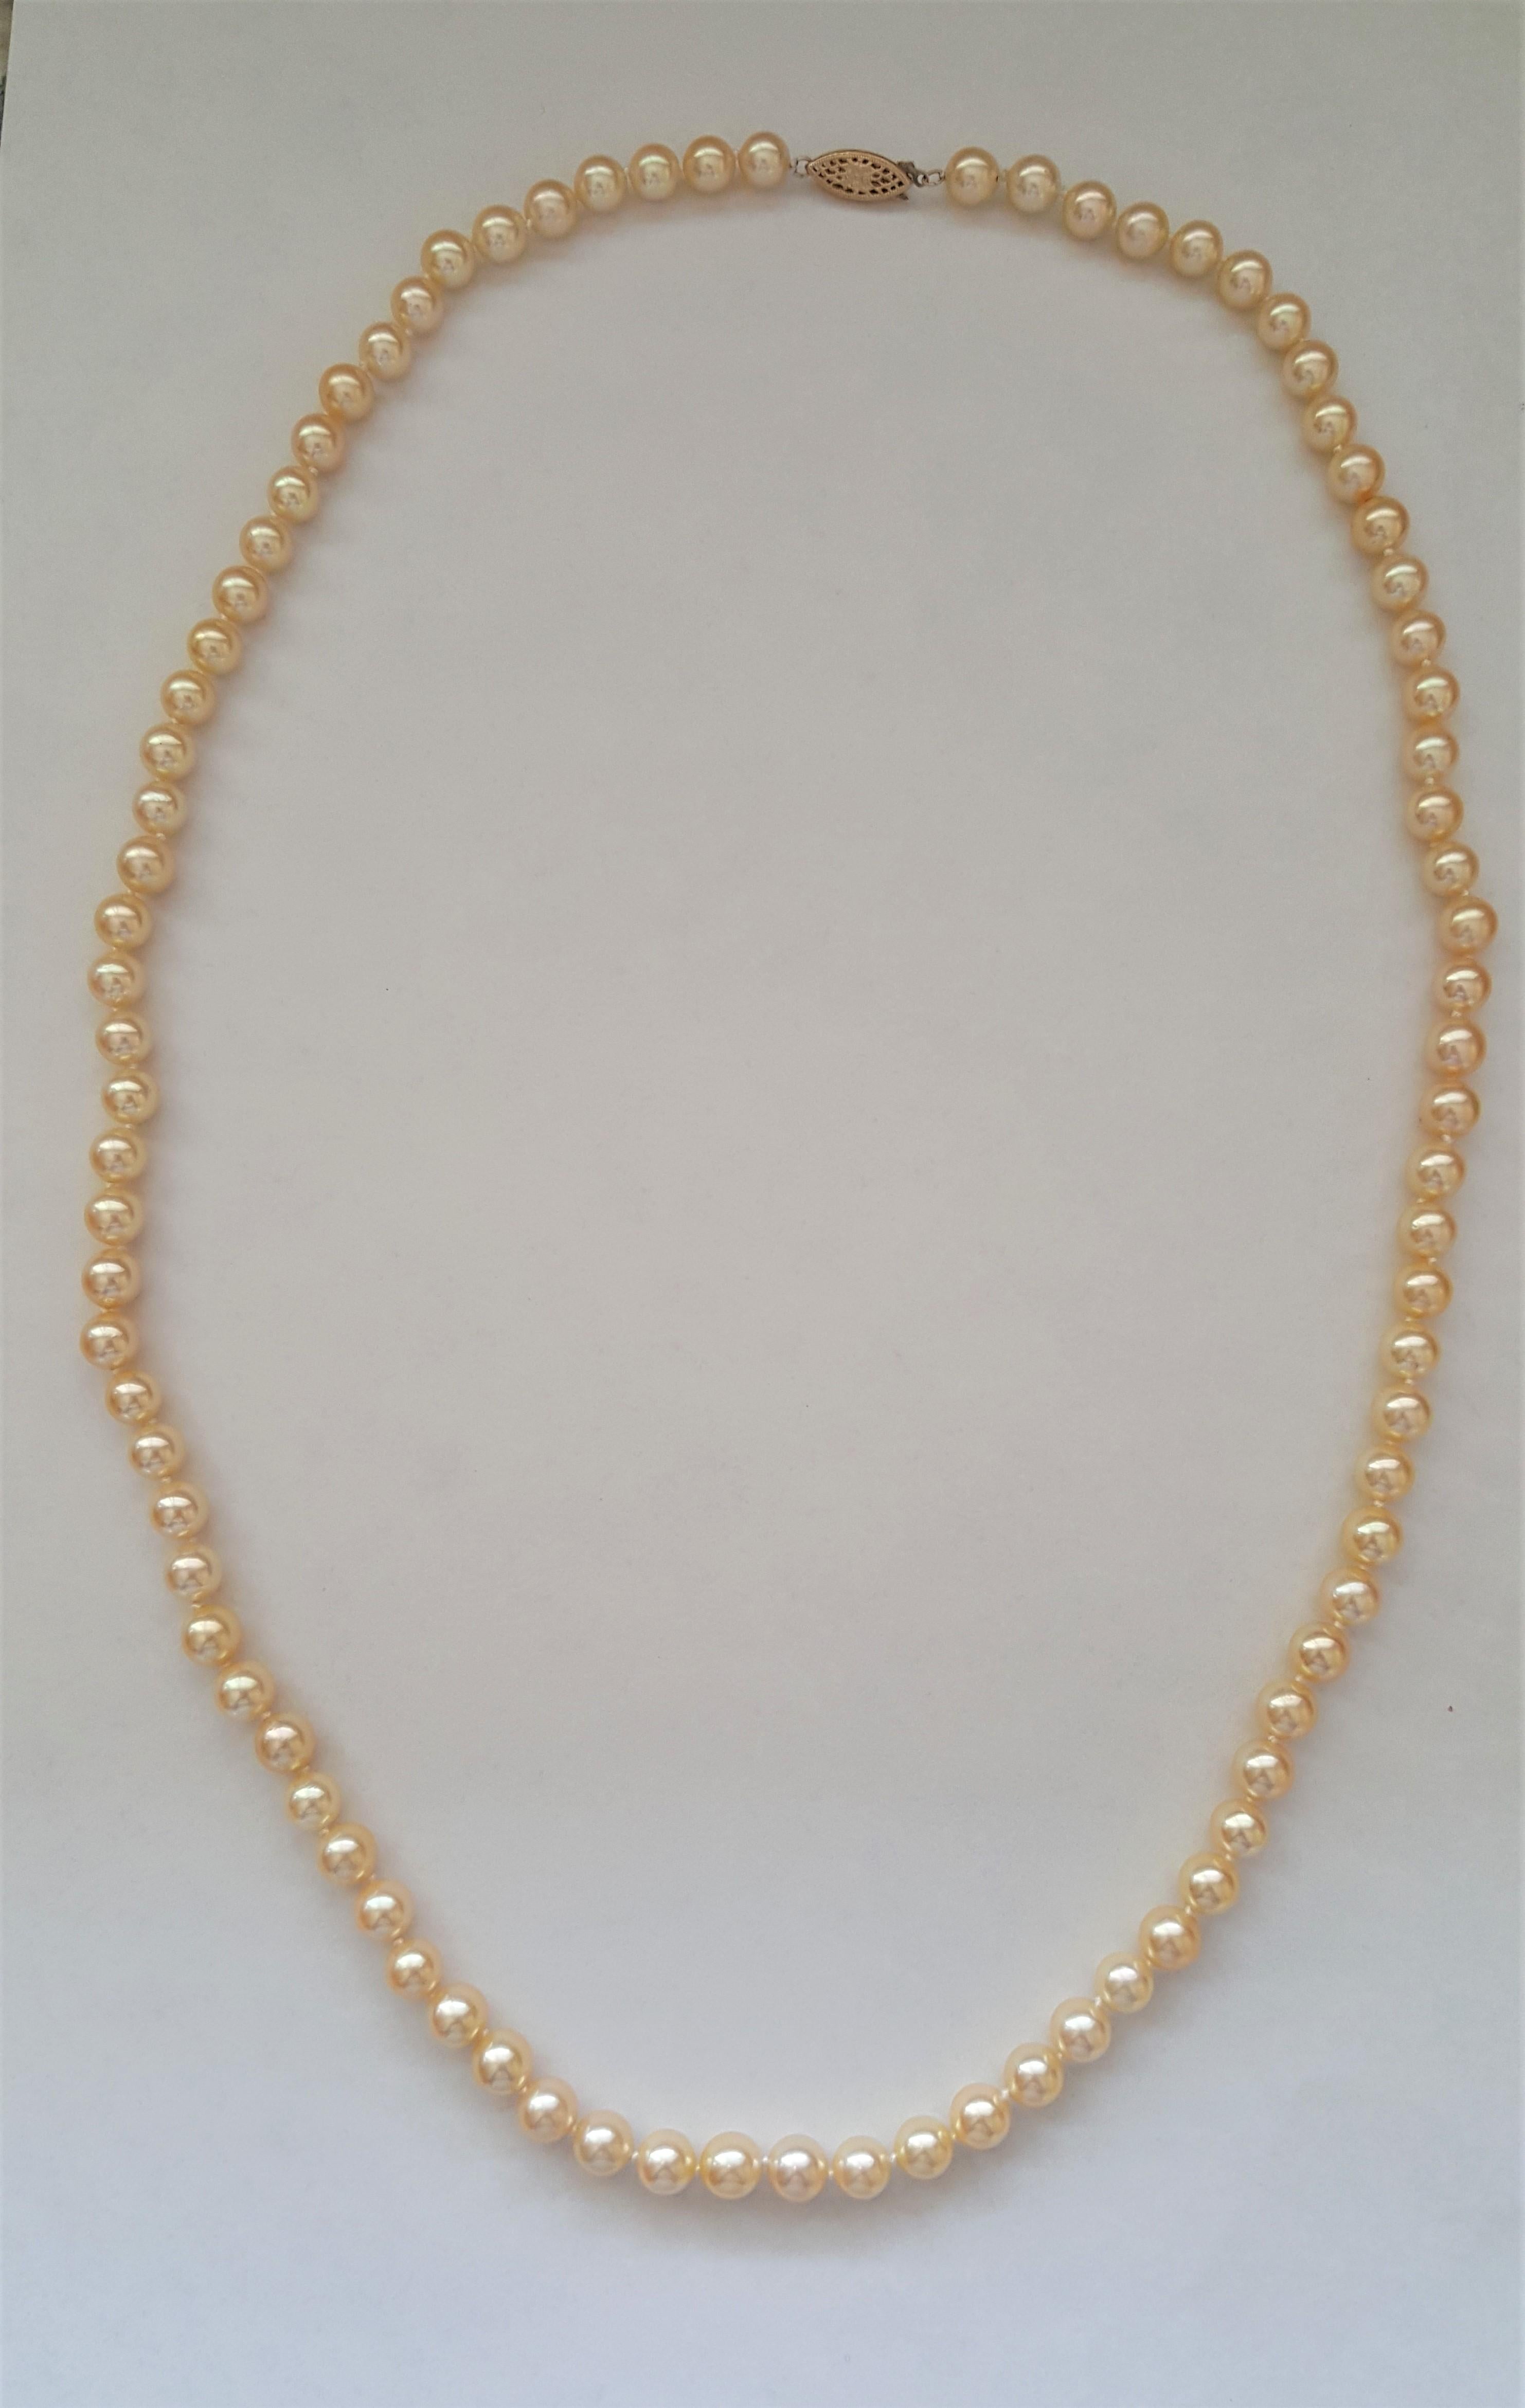 A beautiful grade AAA cultured pearl set with rich cream gold pearls that are 7+mm in size. The necklace is 27 inches long, secured with a 14k yellow gold filigree pearl clasp, stamped. The bracelet has a 14kt yellow gold decorative clasp that's